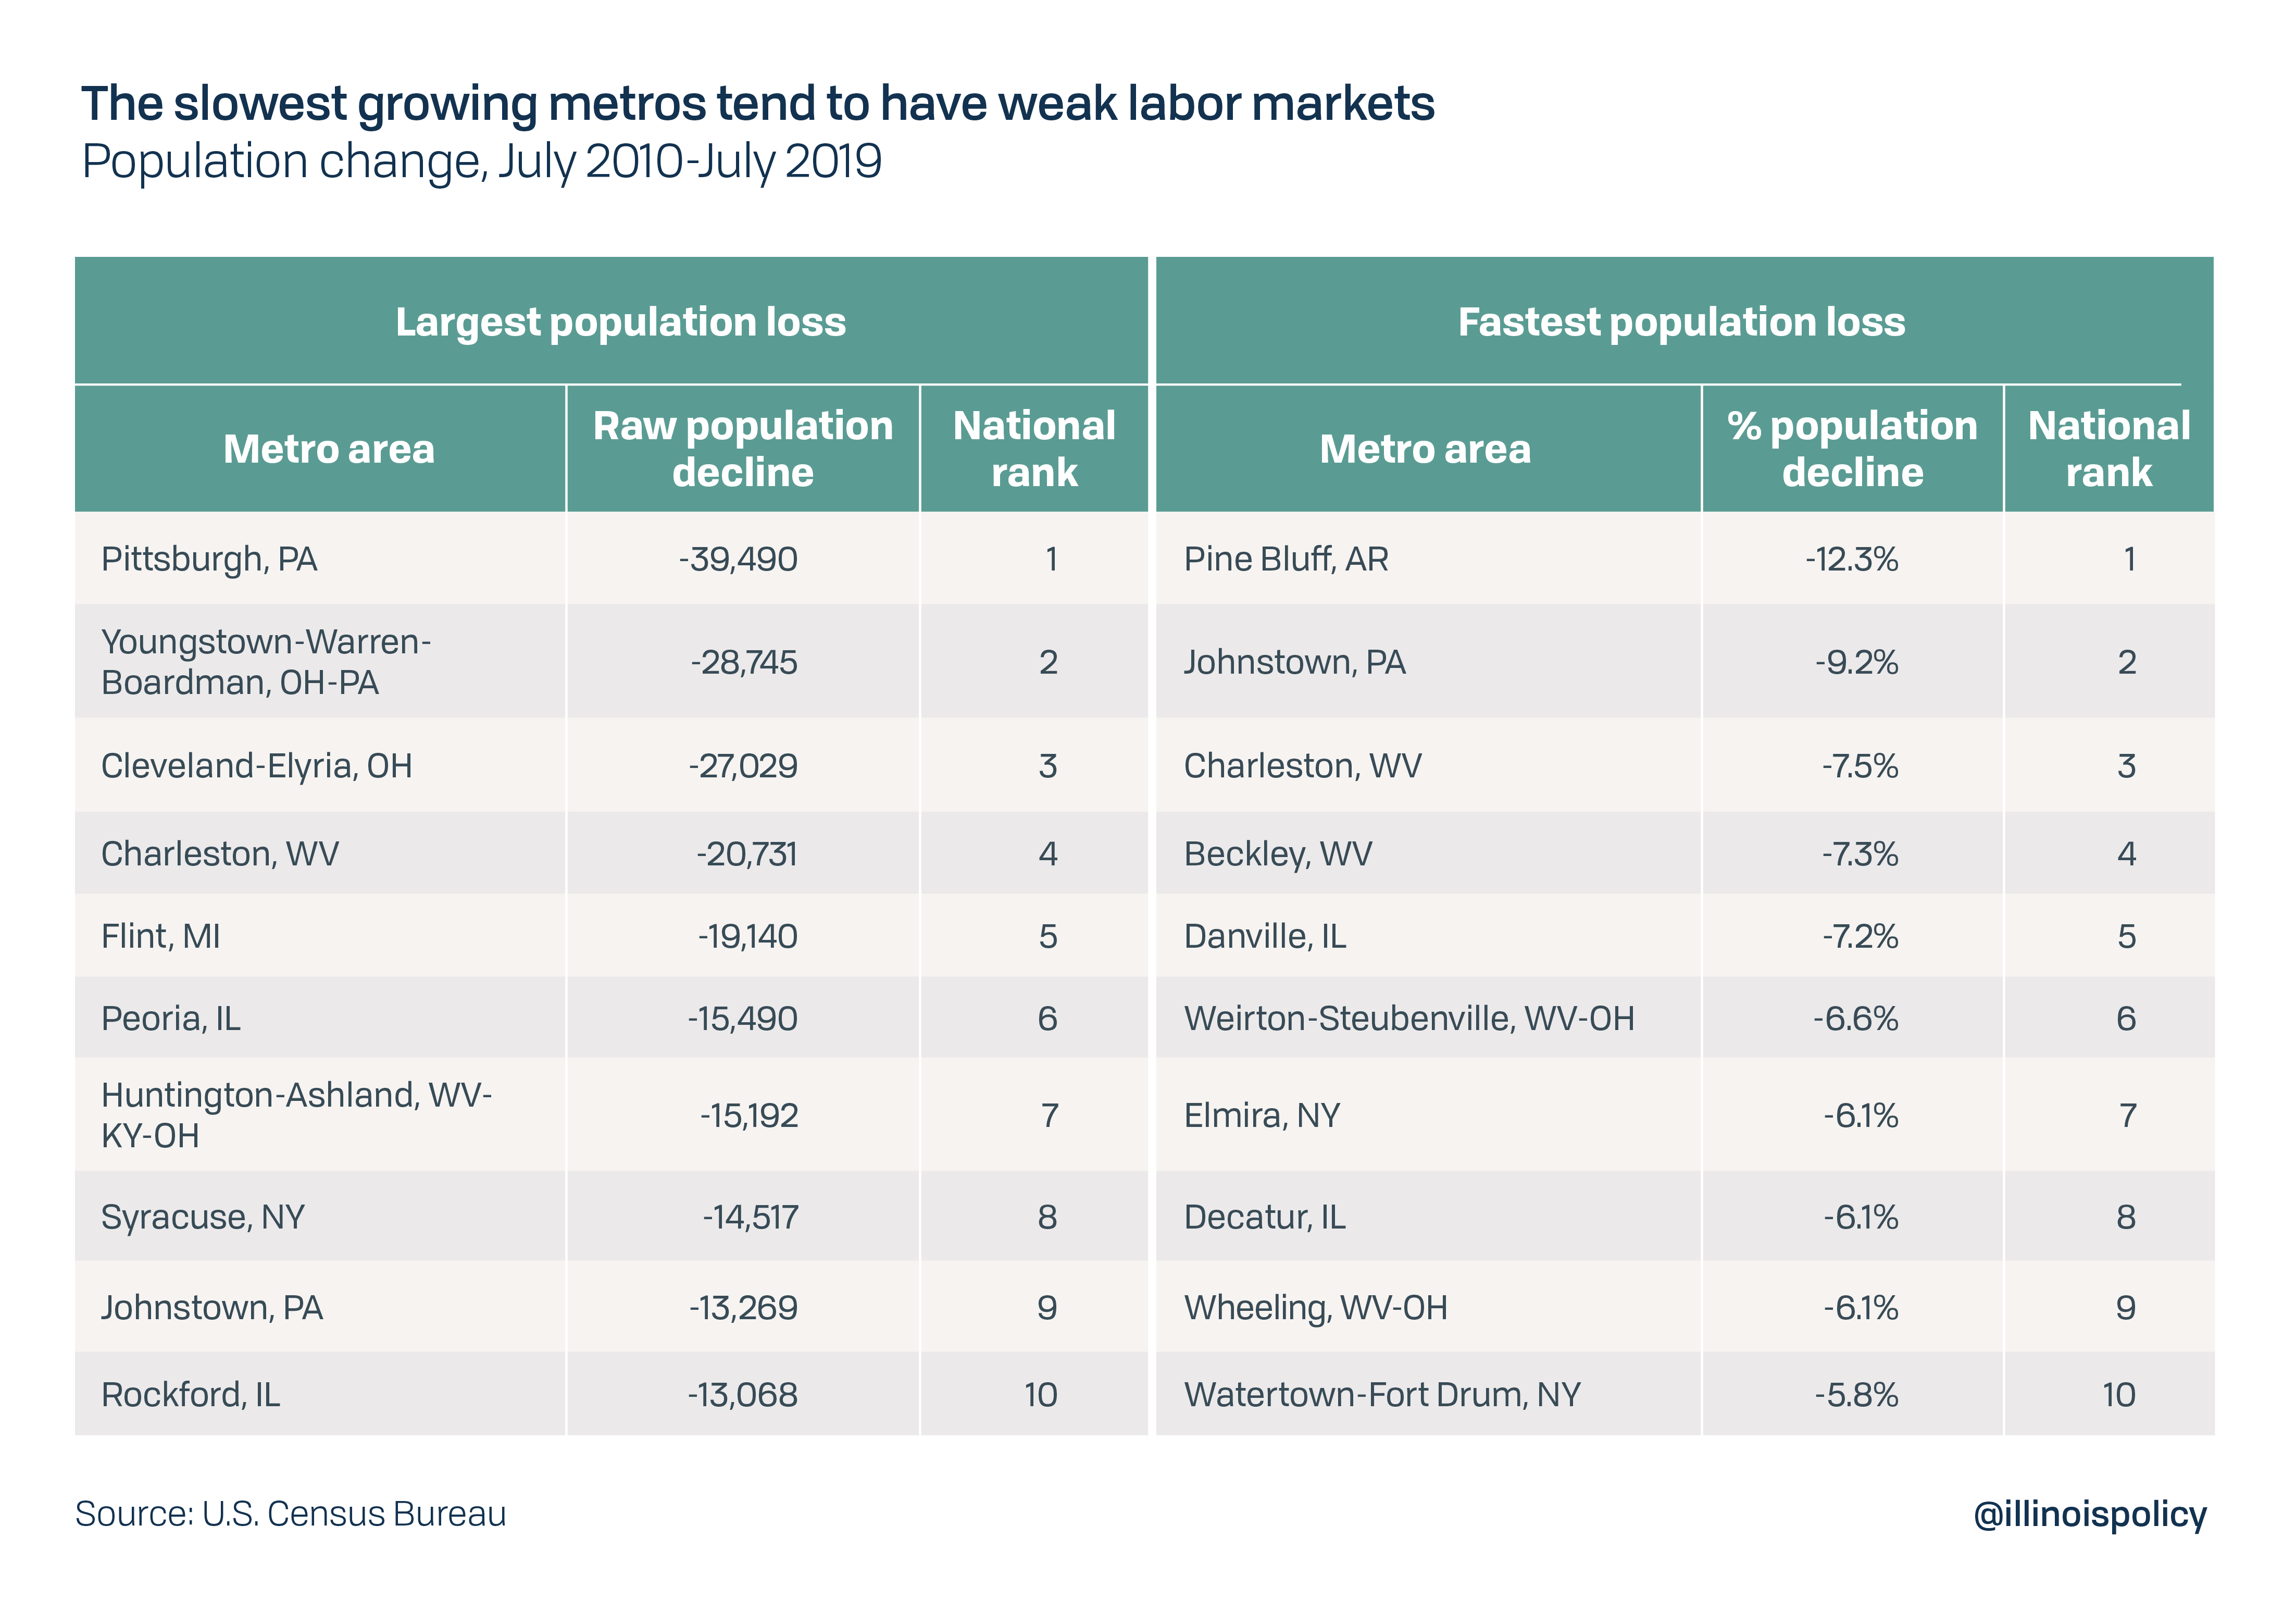 The slowest growing metros tend to have weak labor markets